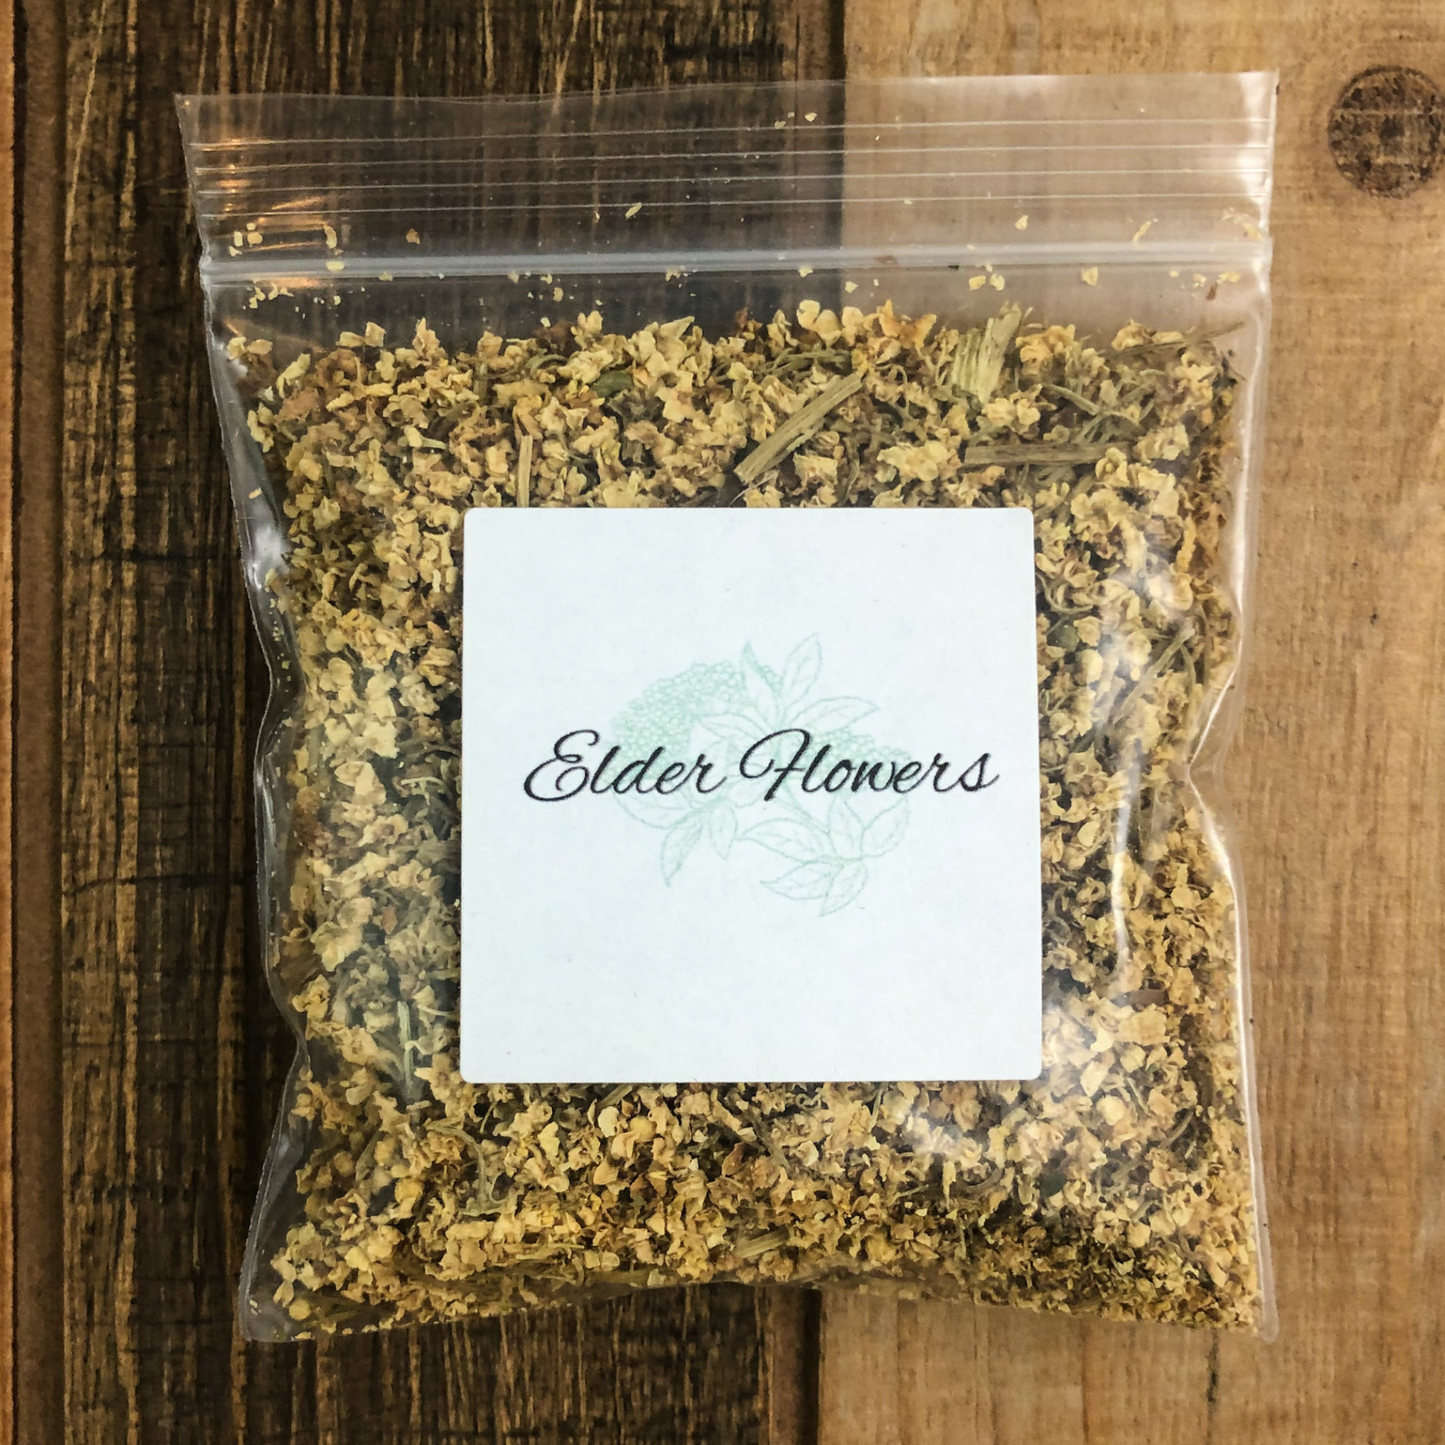 small clear bag of dried elderflowers with a wooden background